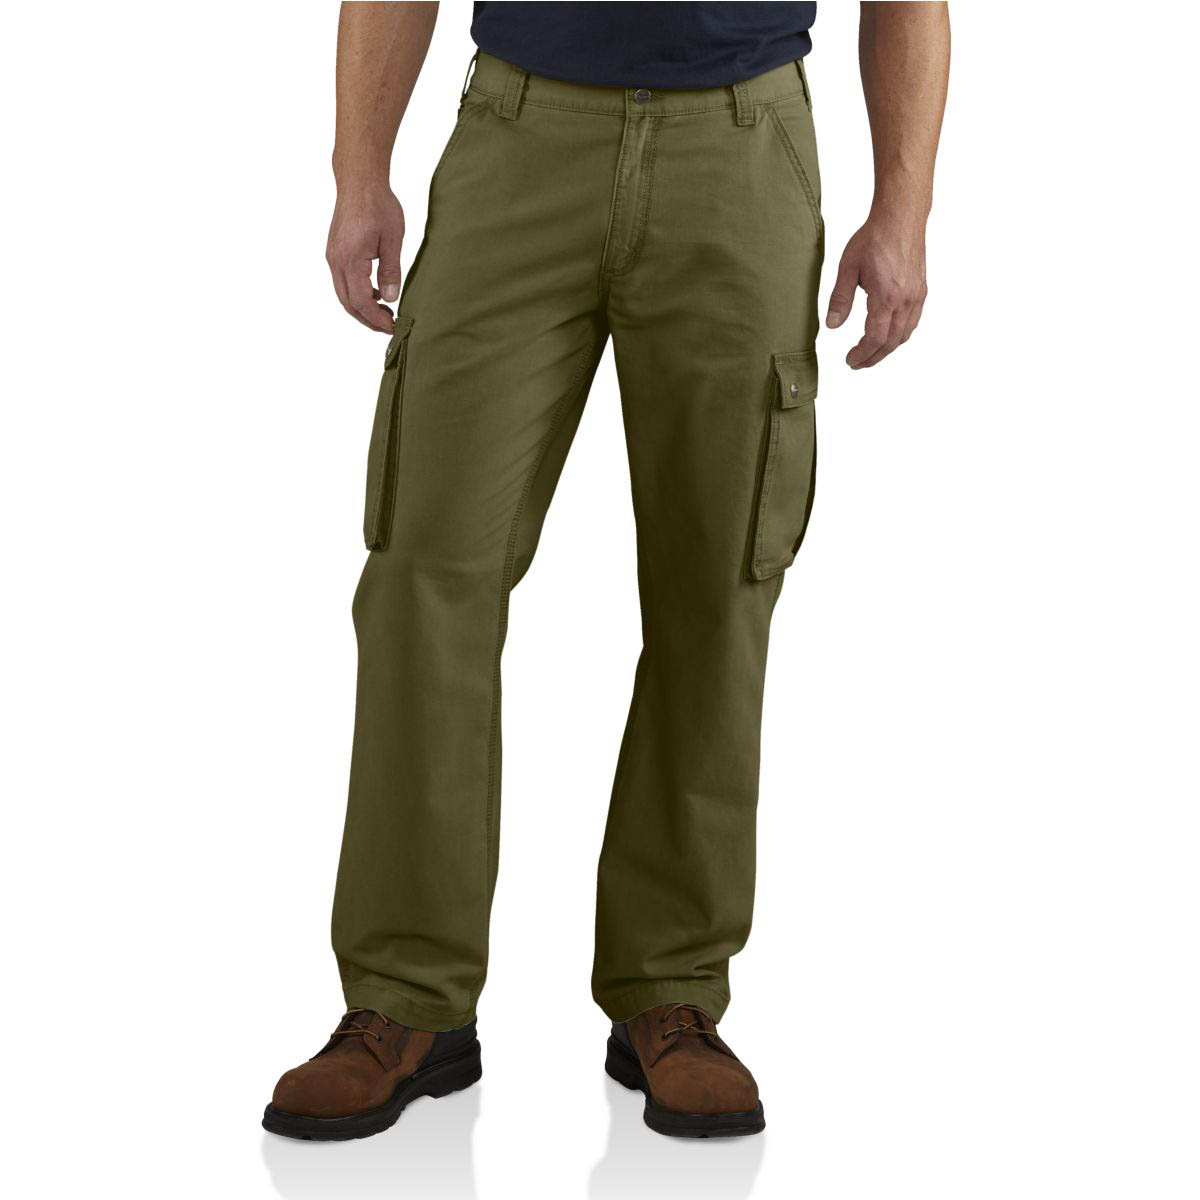 Carhartt Men's Rugged Cargo Pant Discontinued Pricing